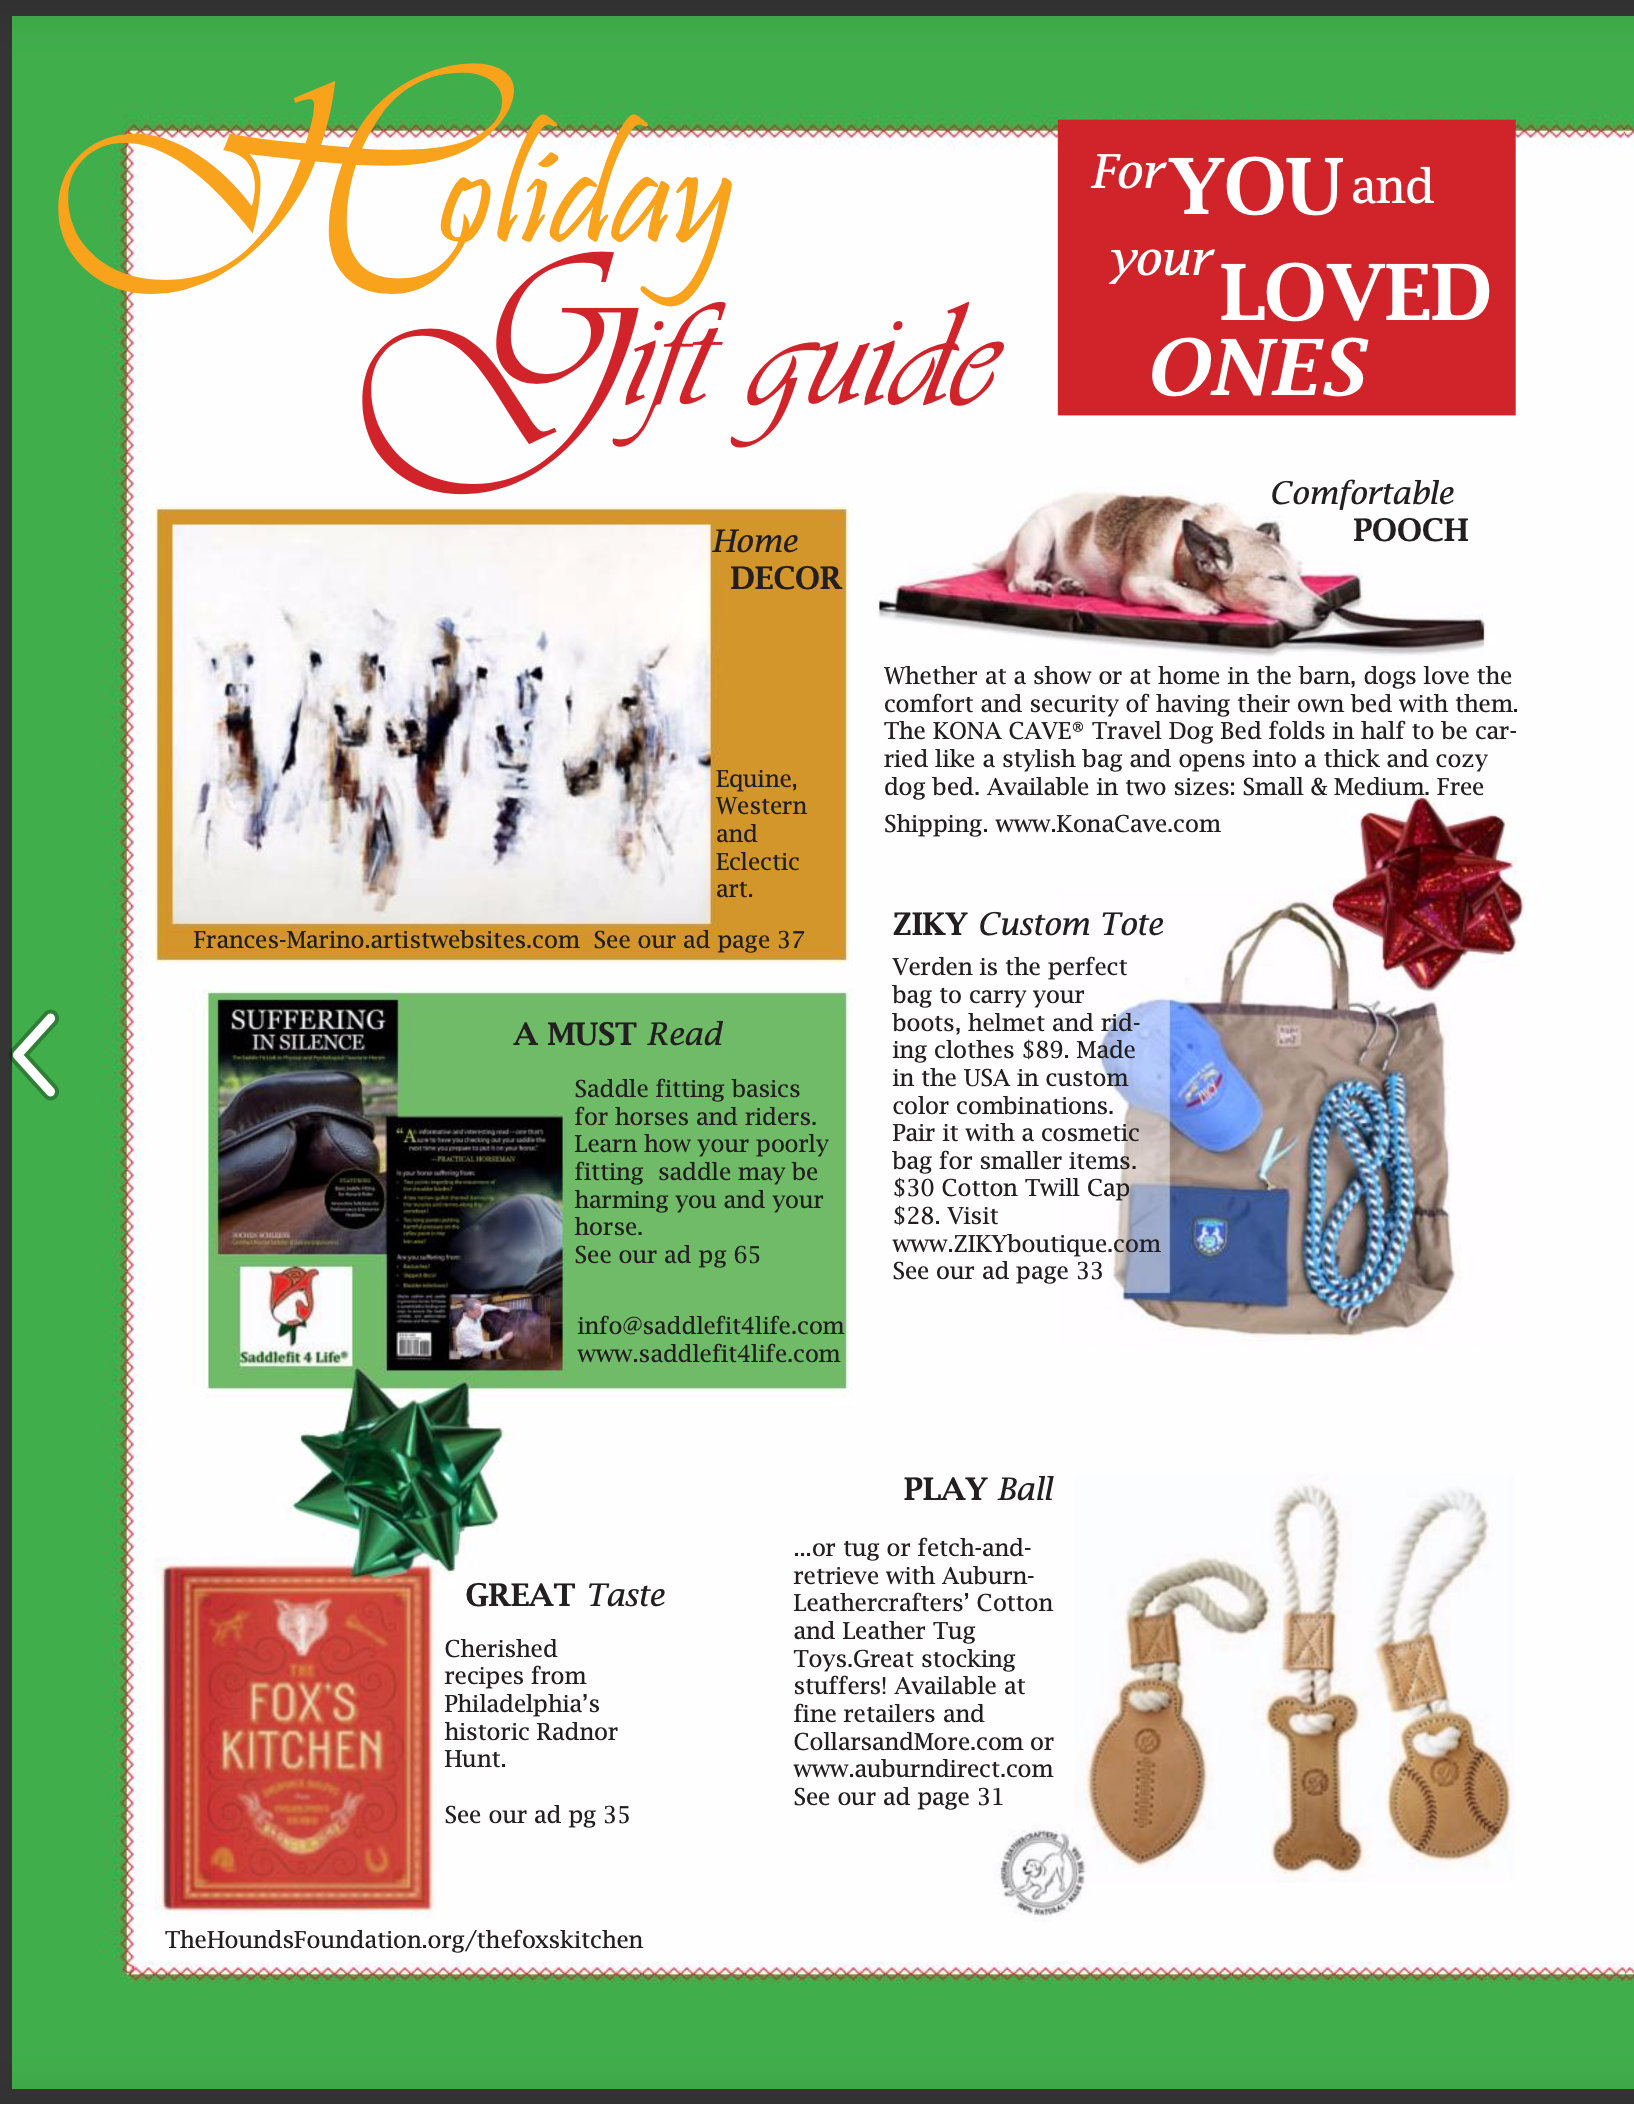 KONA CAVE® The Best Dog Bed in The Barn - HOLIDAY GIFT IDEA from Elite Equestrian Magazine